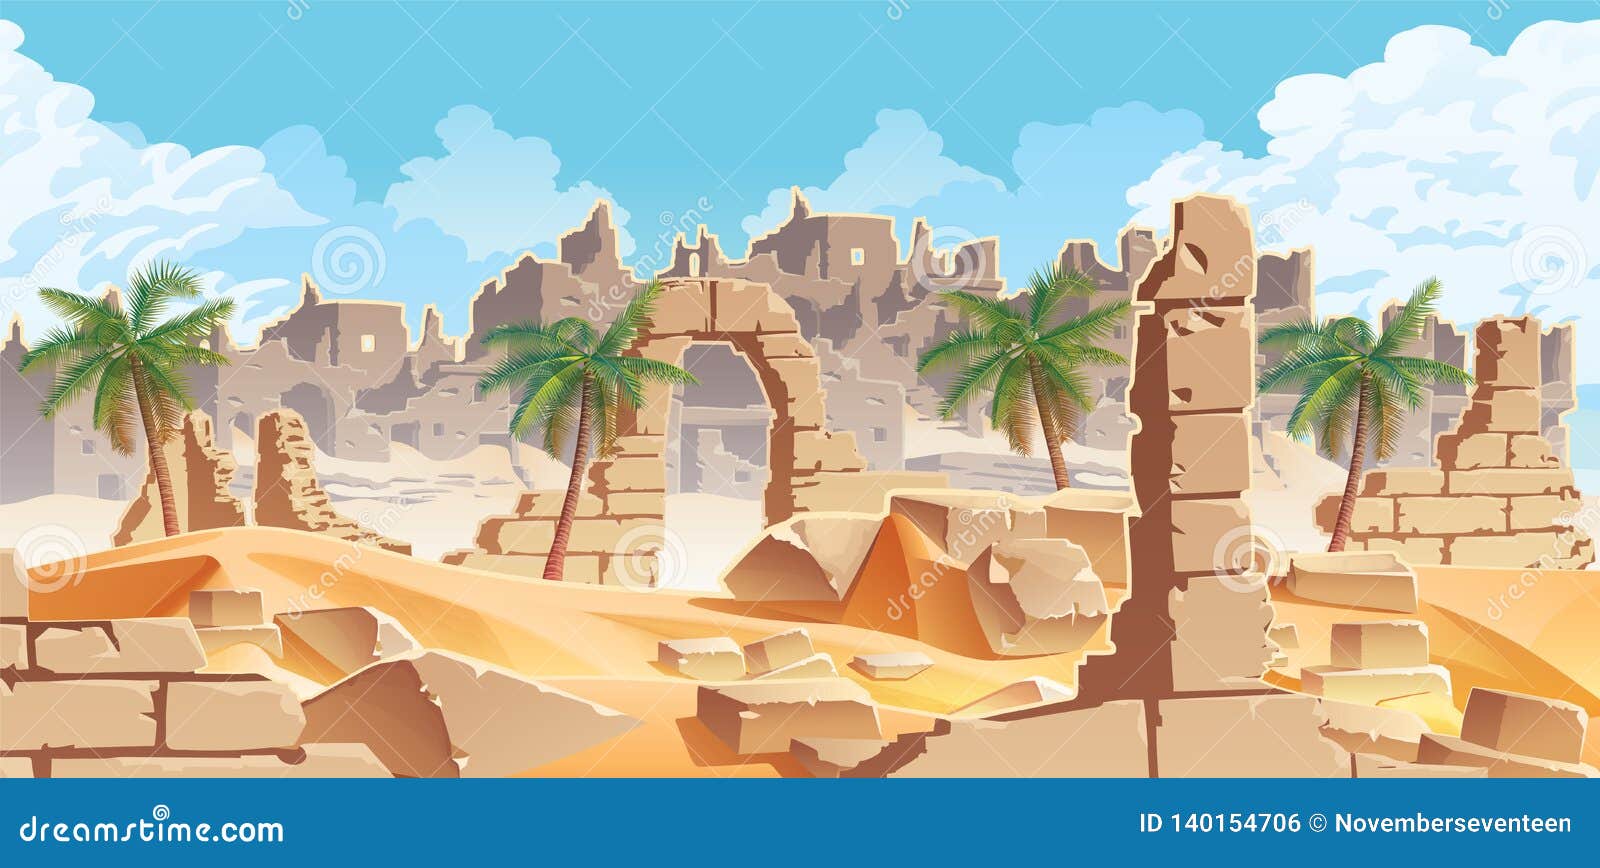 horizontal background with desert and palms. city ruins on the horizon